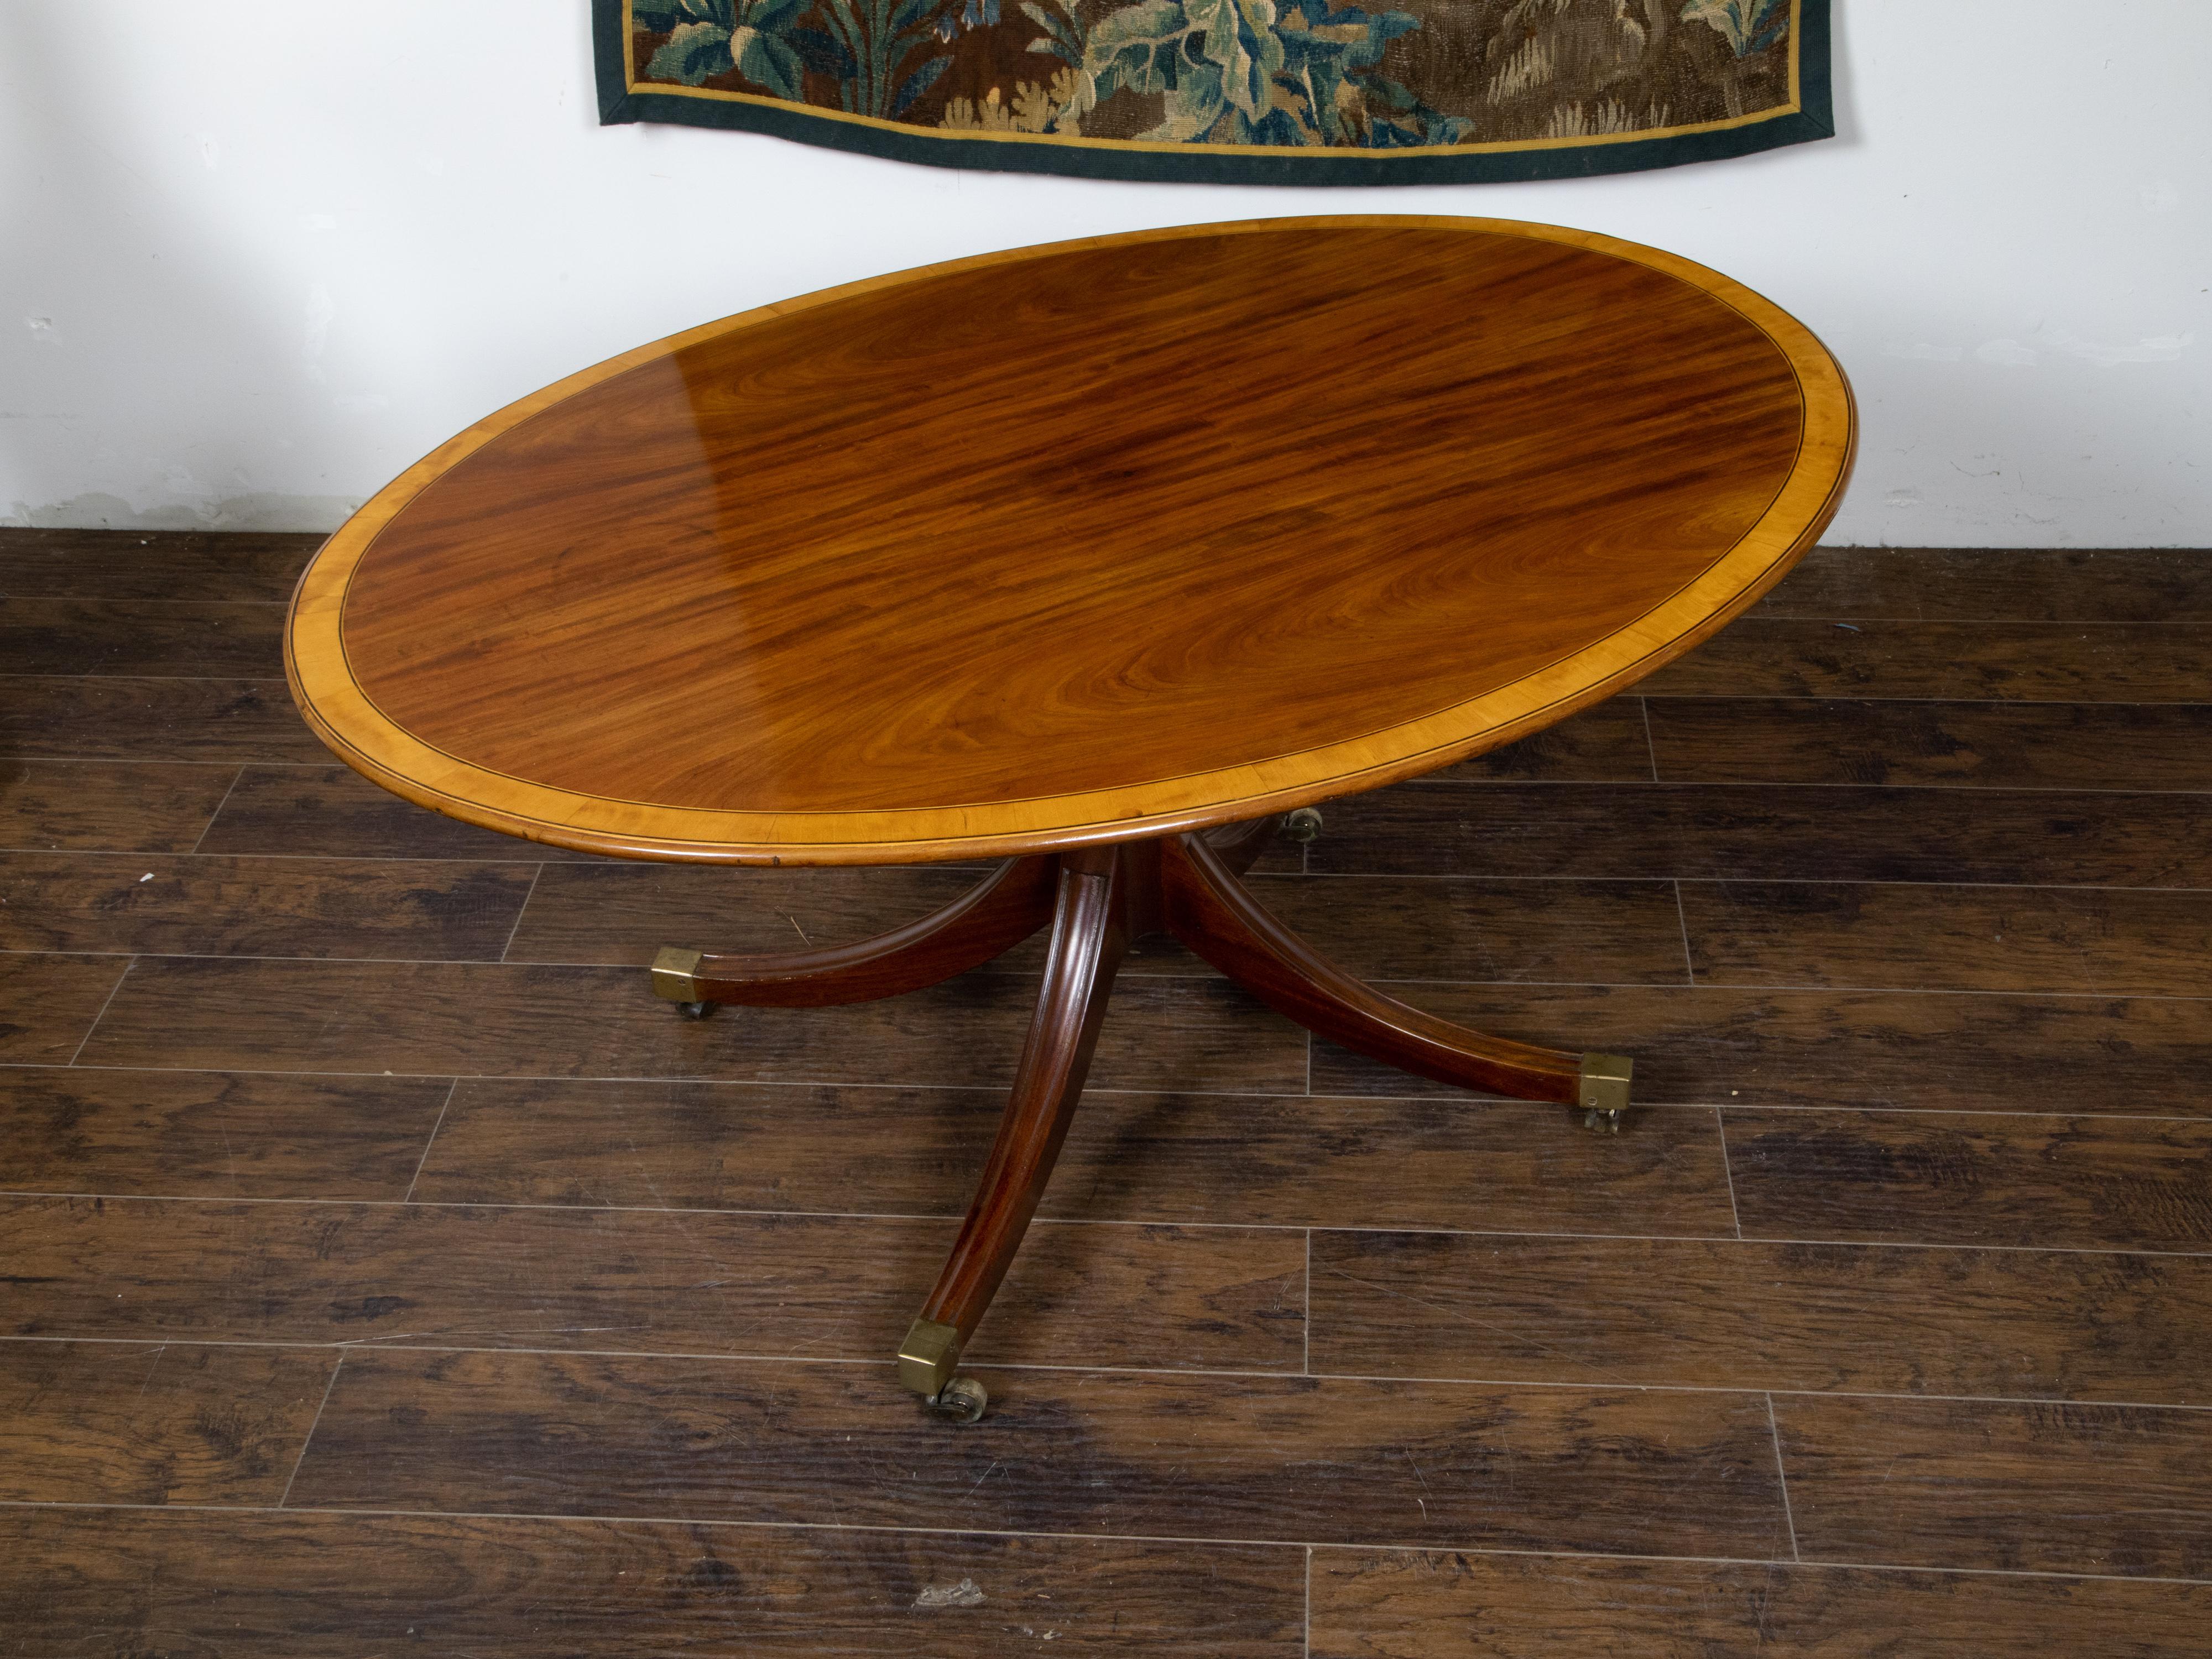 English Mahogany 1840s Oval Top Pedestal Table with Quadripod Base and Casters For Sale 2